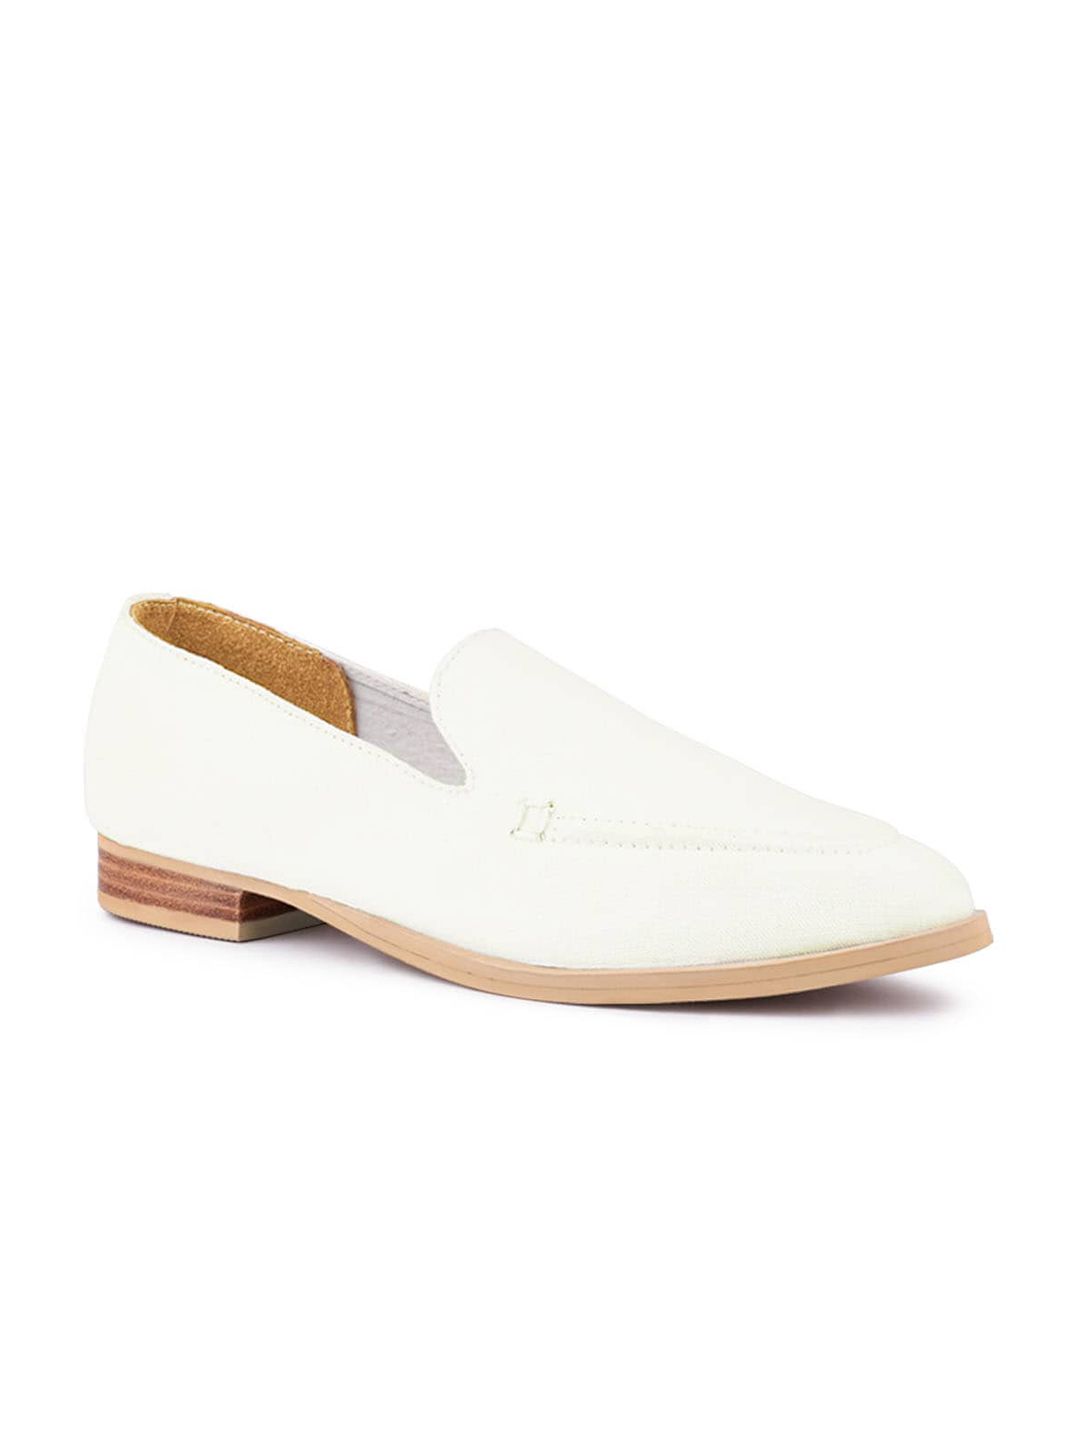 London Rag Women White Perforations Loafers Price in India